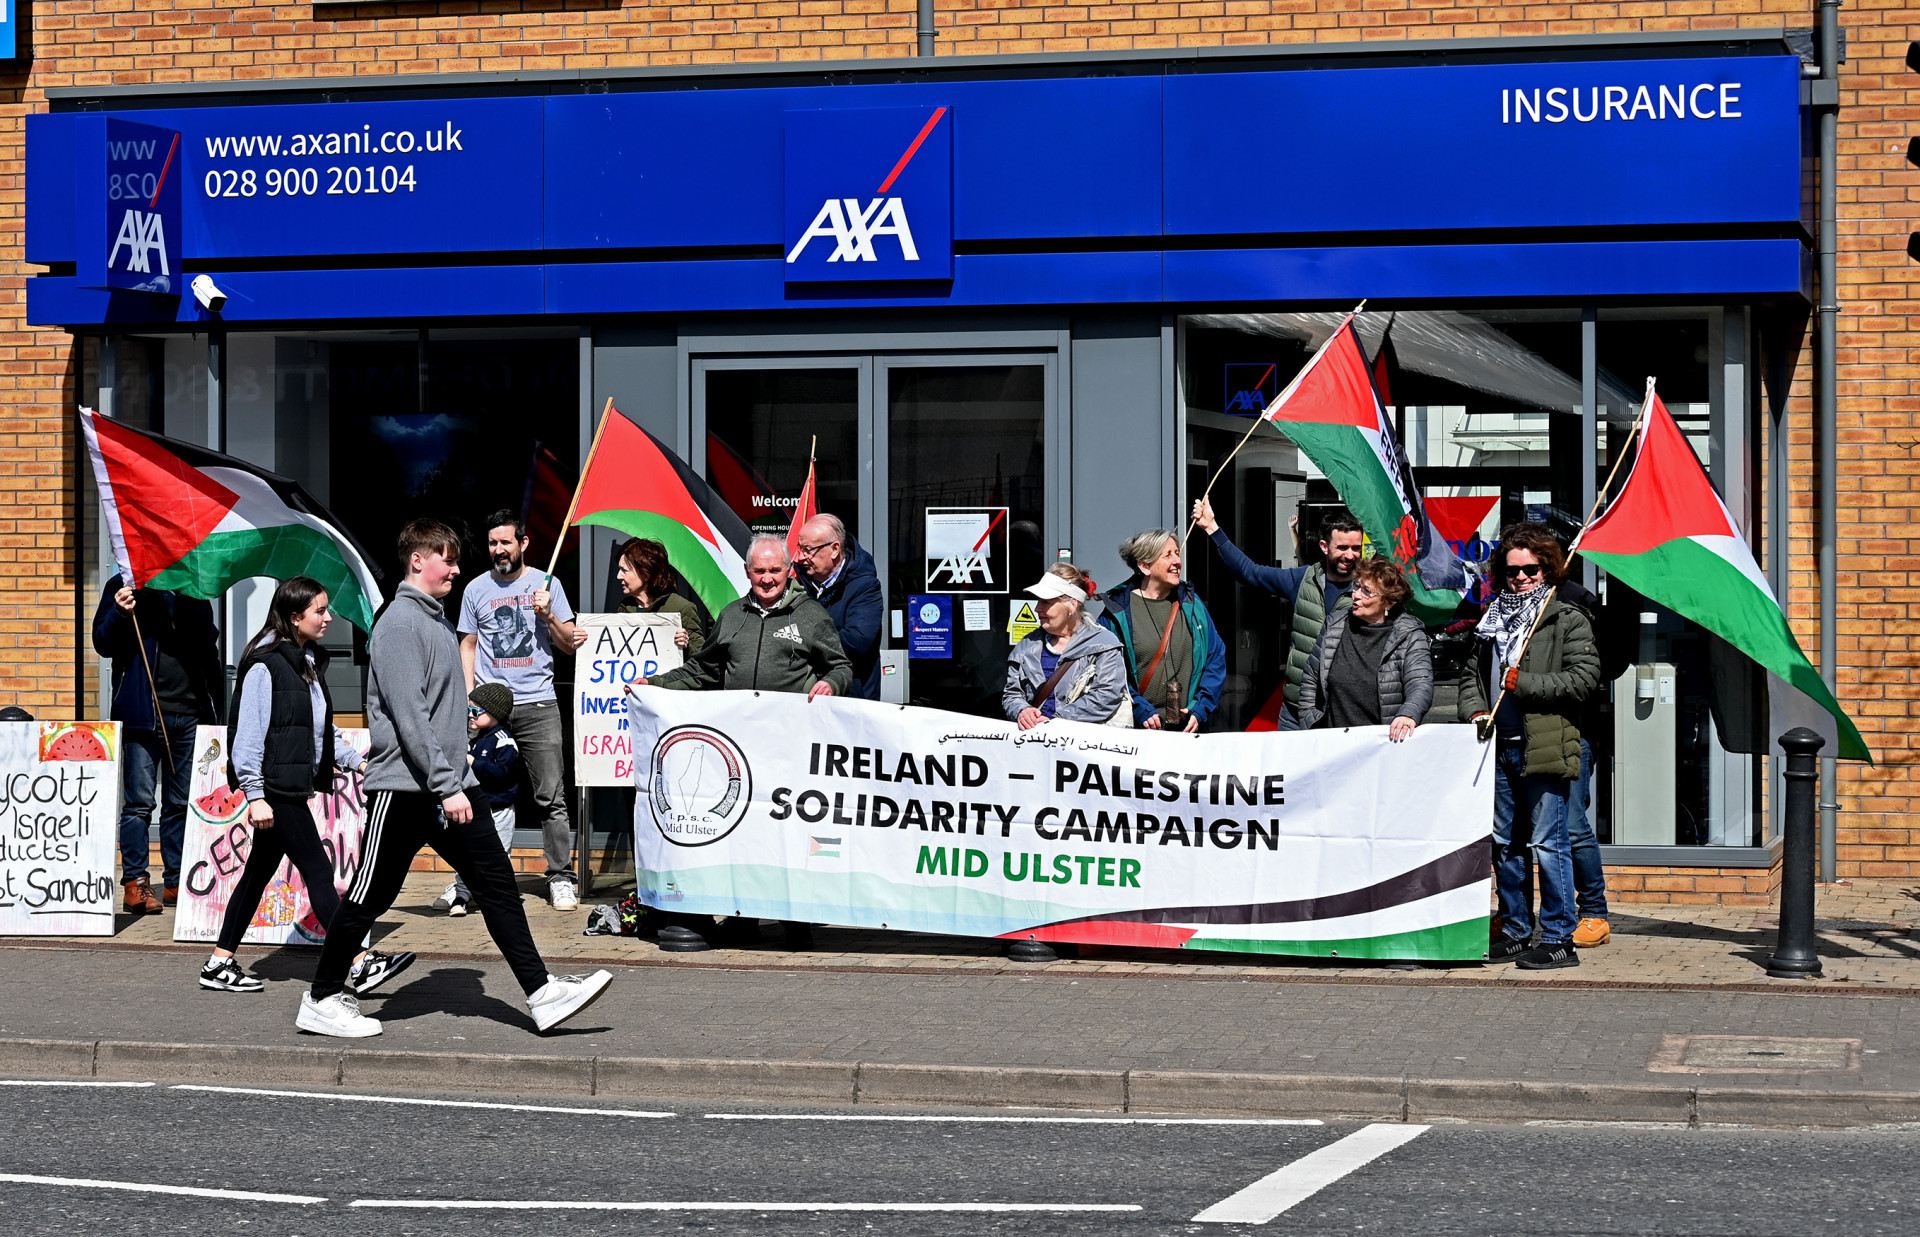 Pro-Palestine campaigners protest outside AXA branch